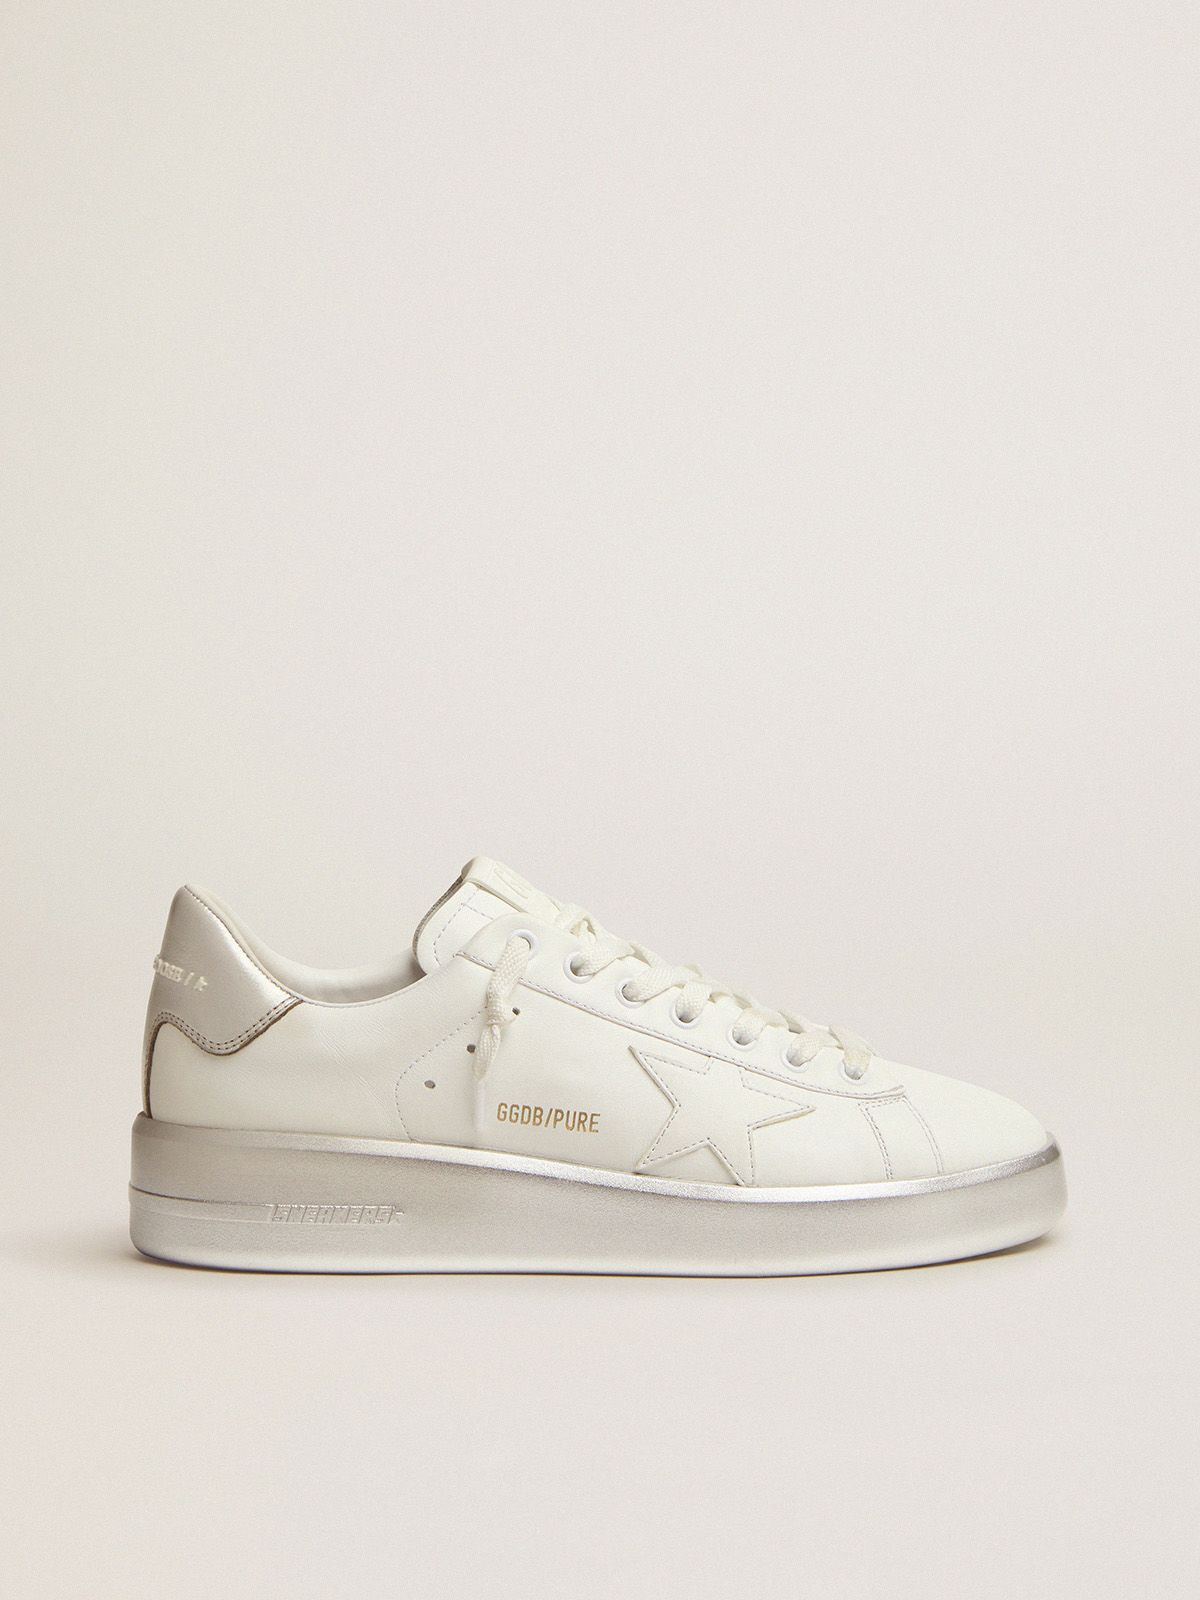 golden goose silver tab laminated with in foxing white sneakers and leather Purestar heel